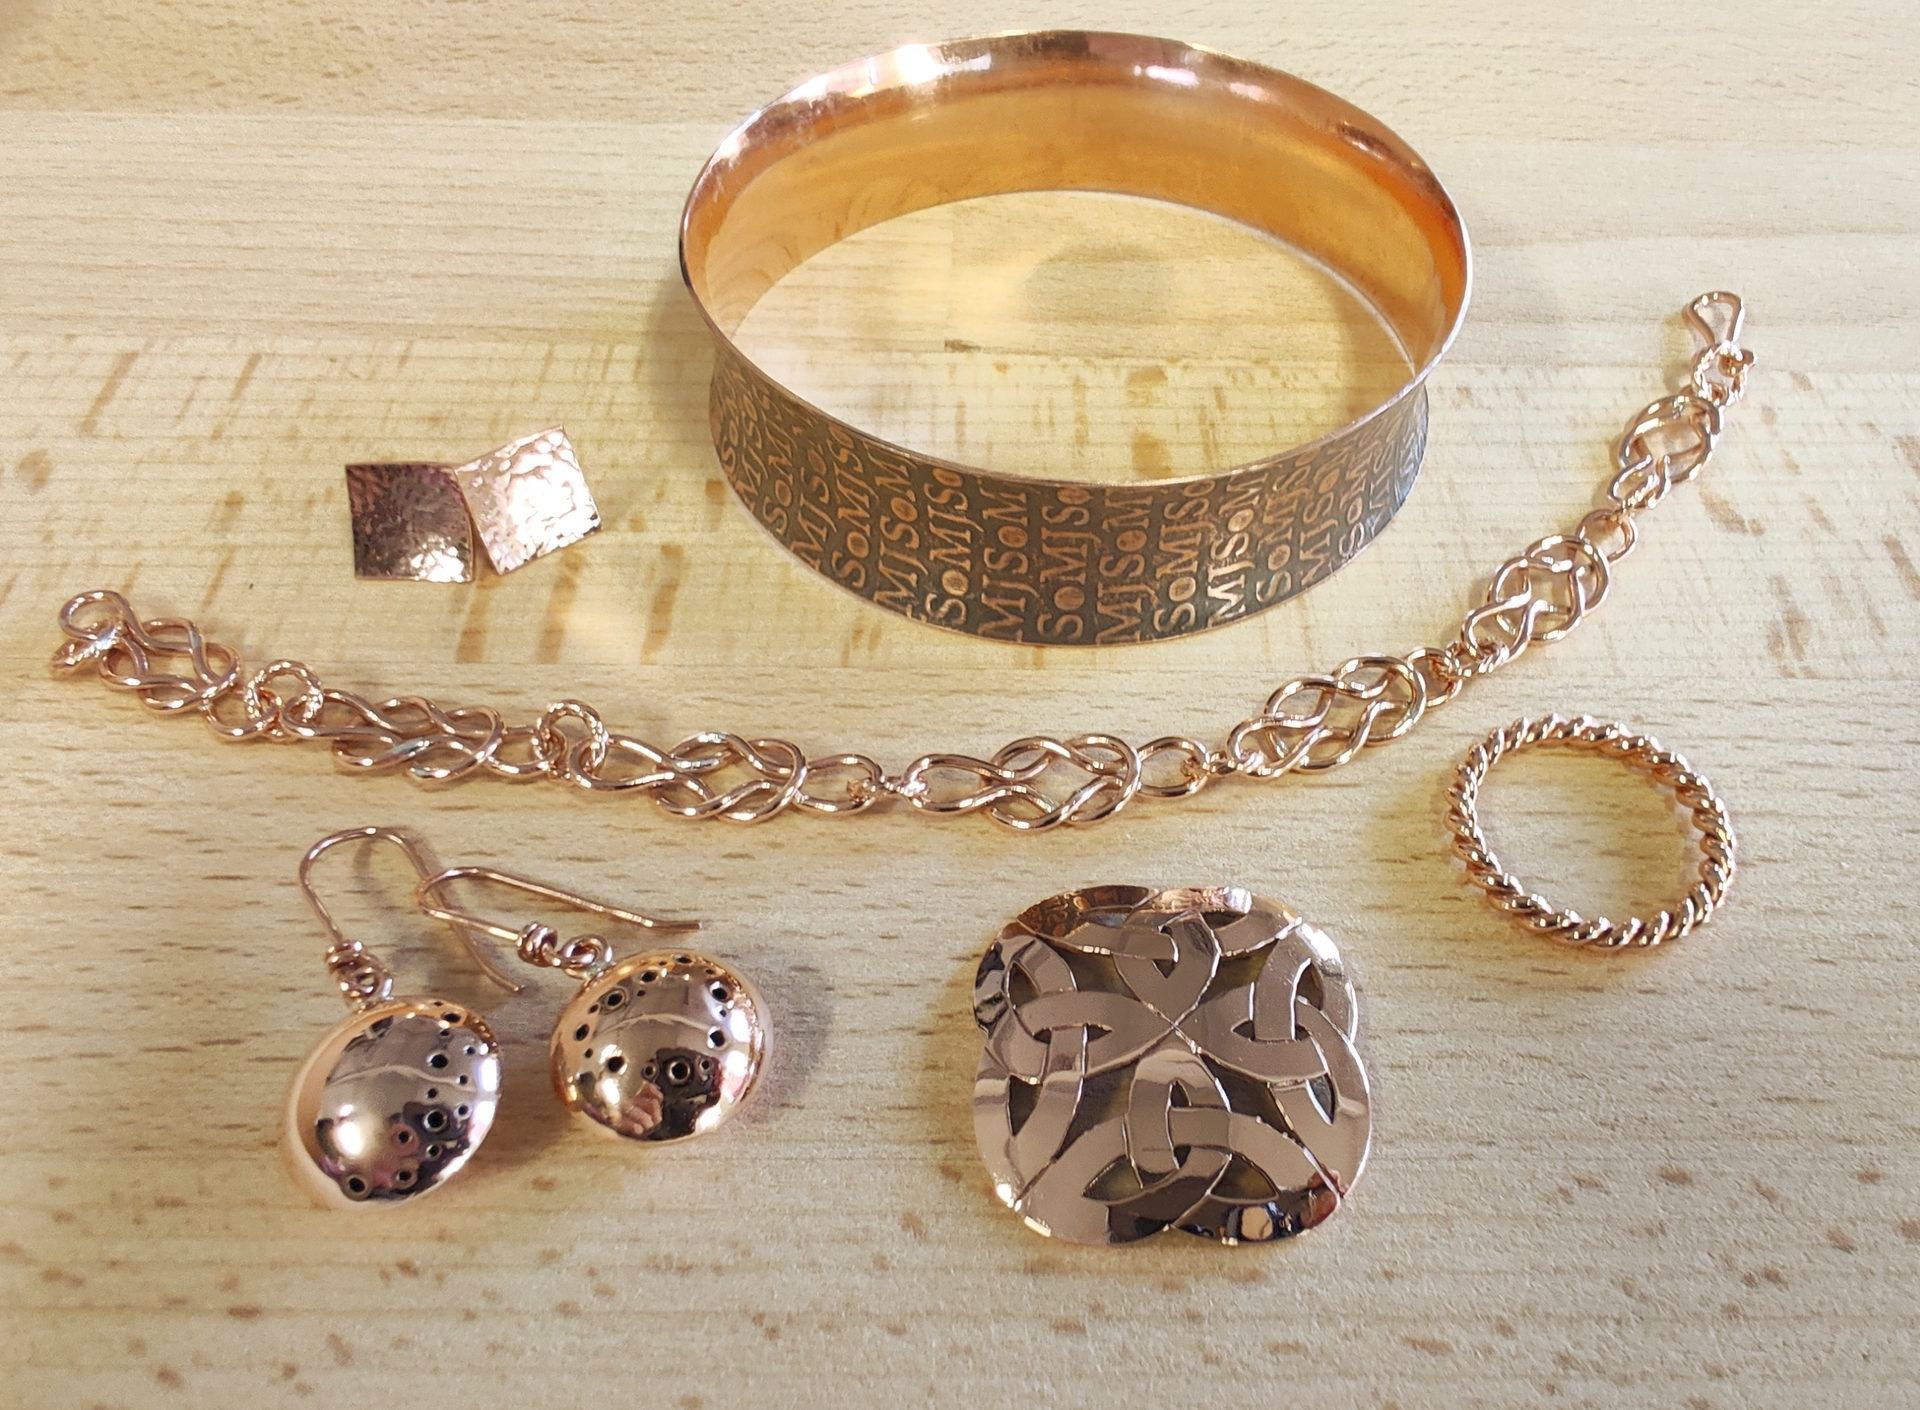 Jewellery projects